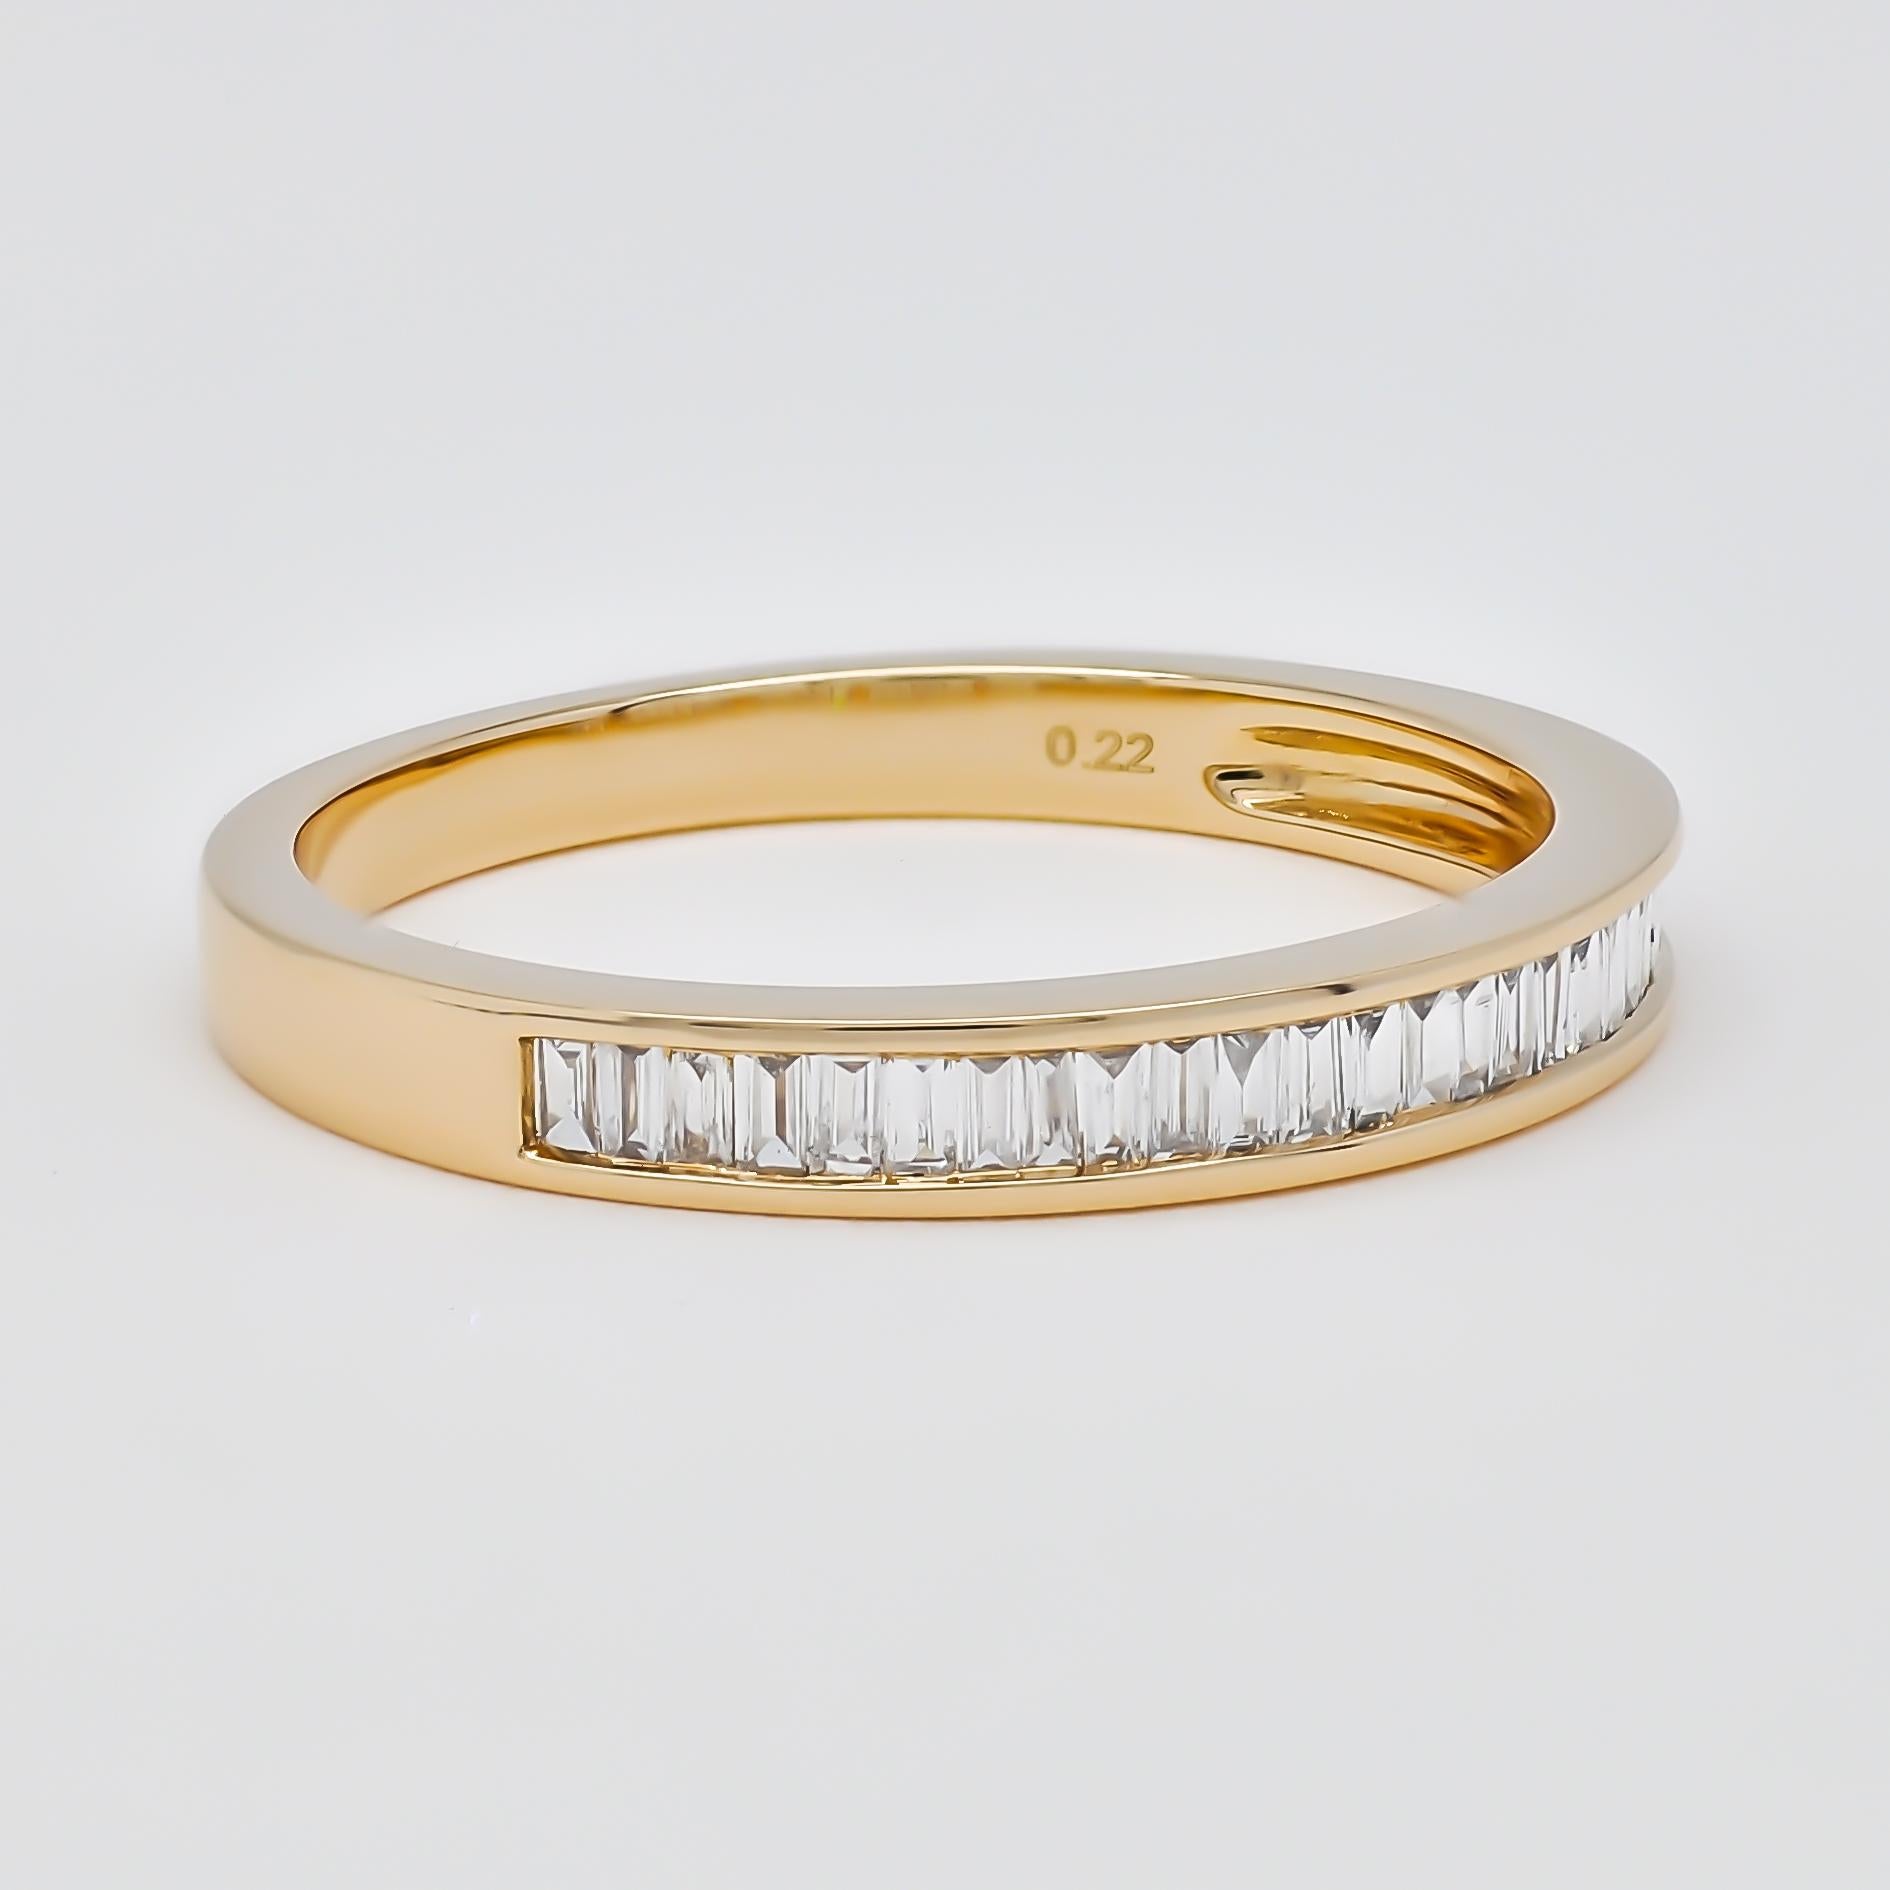 You know You'll be Together Forever and This Sparkling Baguette Diamond Half- Eternity Band Expresses Your Love Perfectly.

Our Eternity Rings are one of the most meaningful representations of eternal and everlasting love. A Beautiful Band of